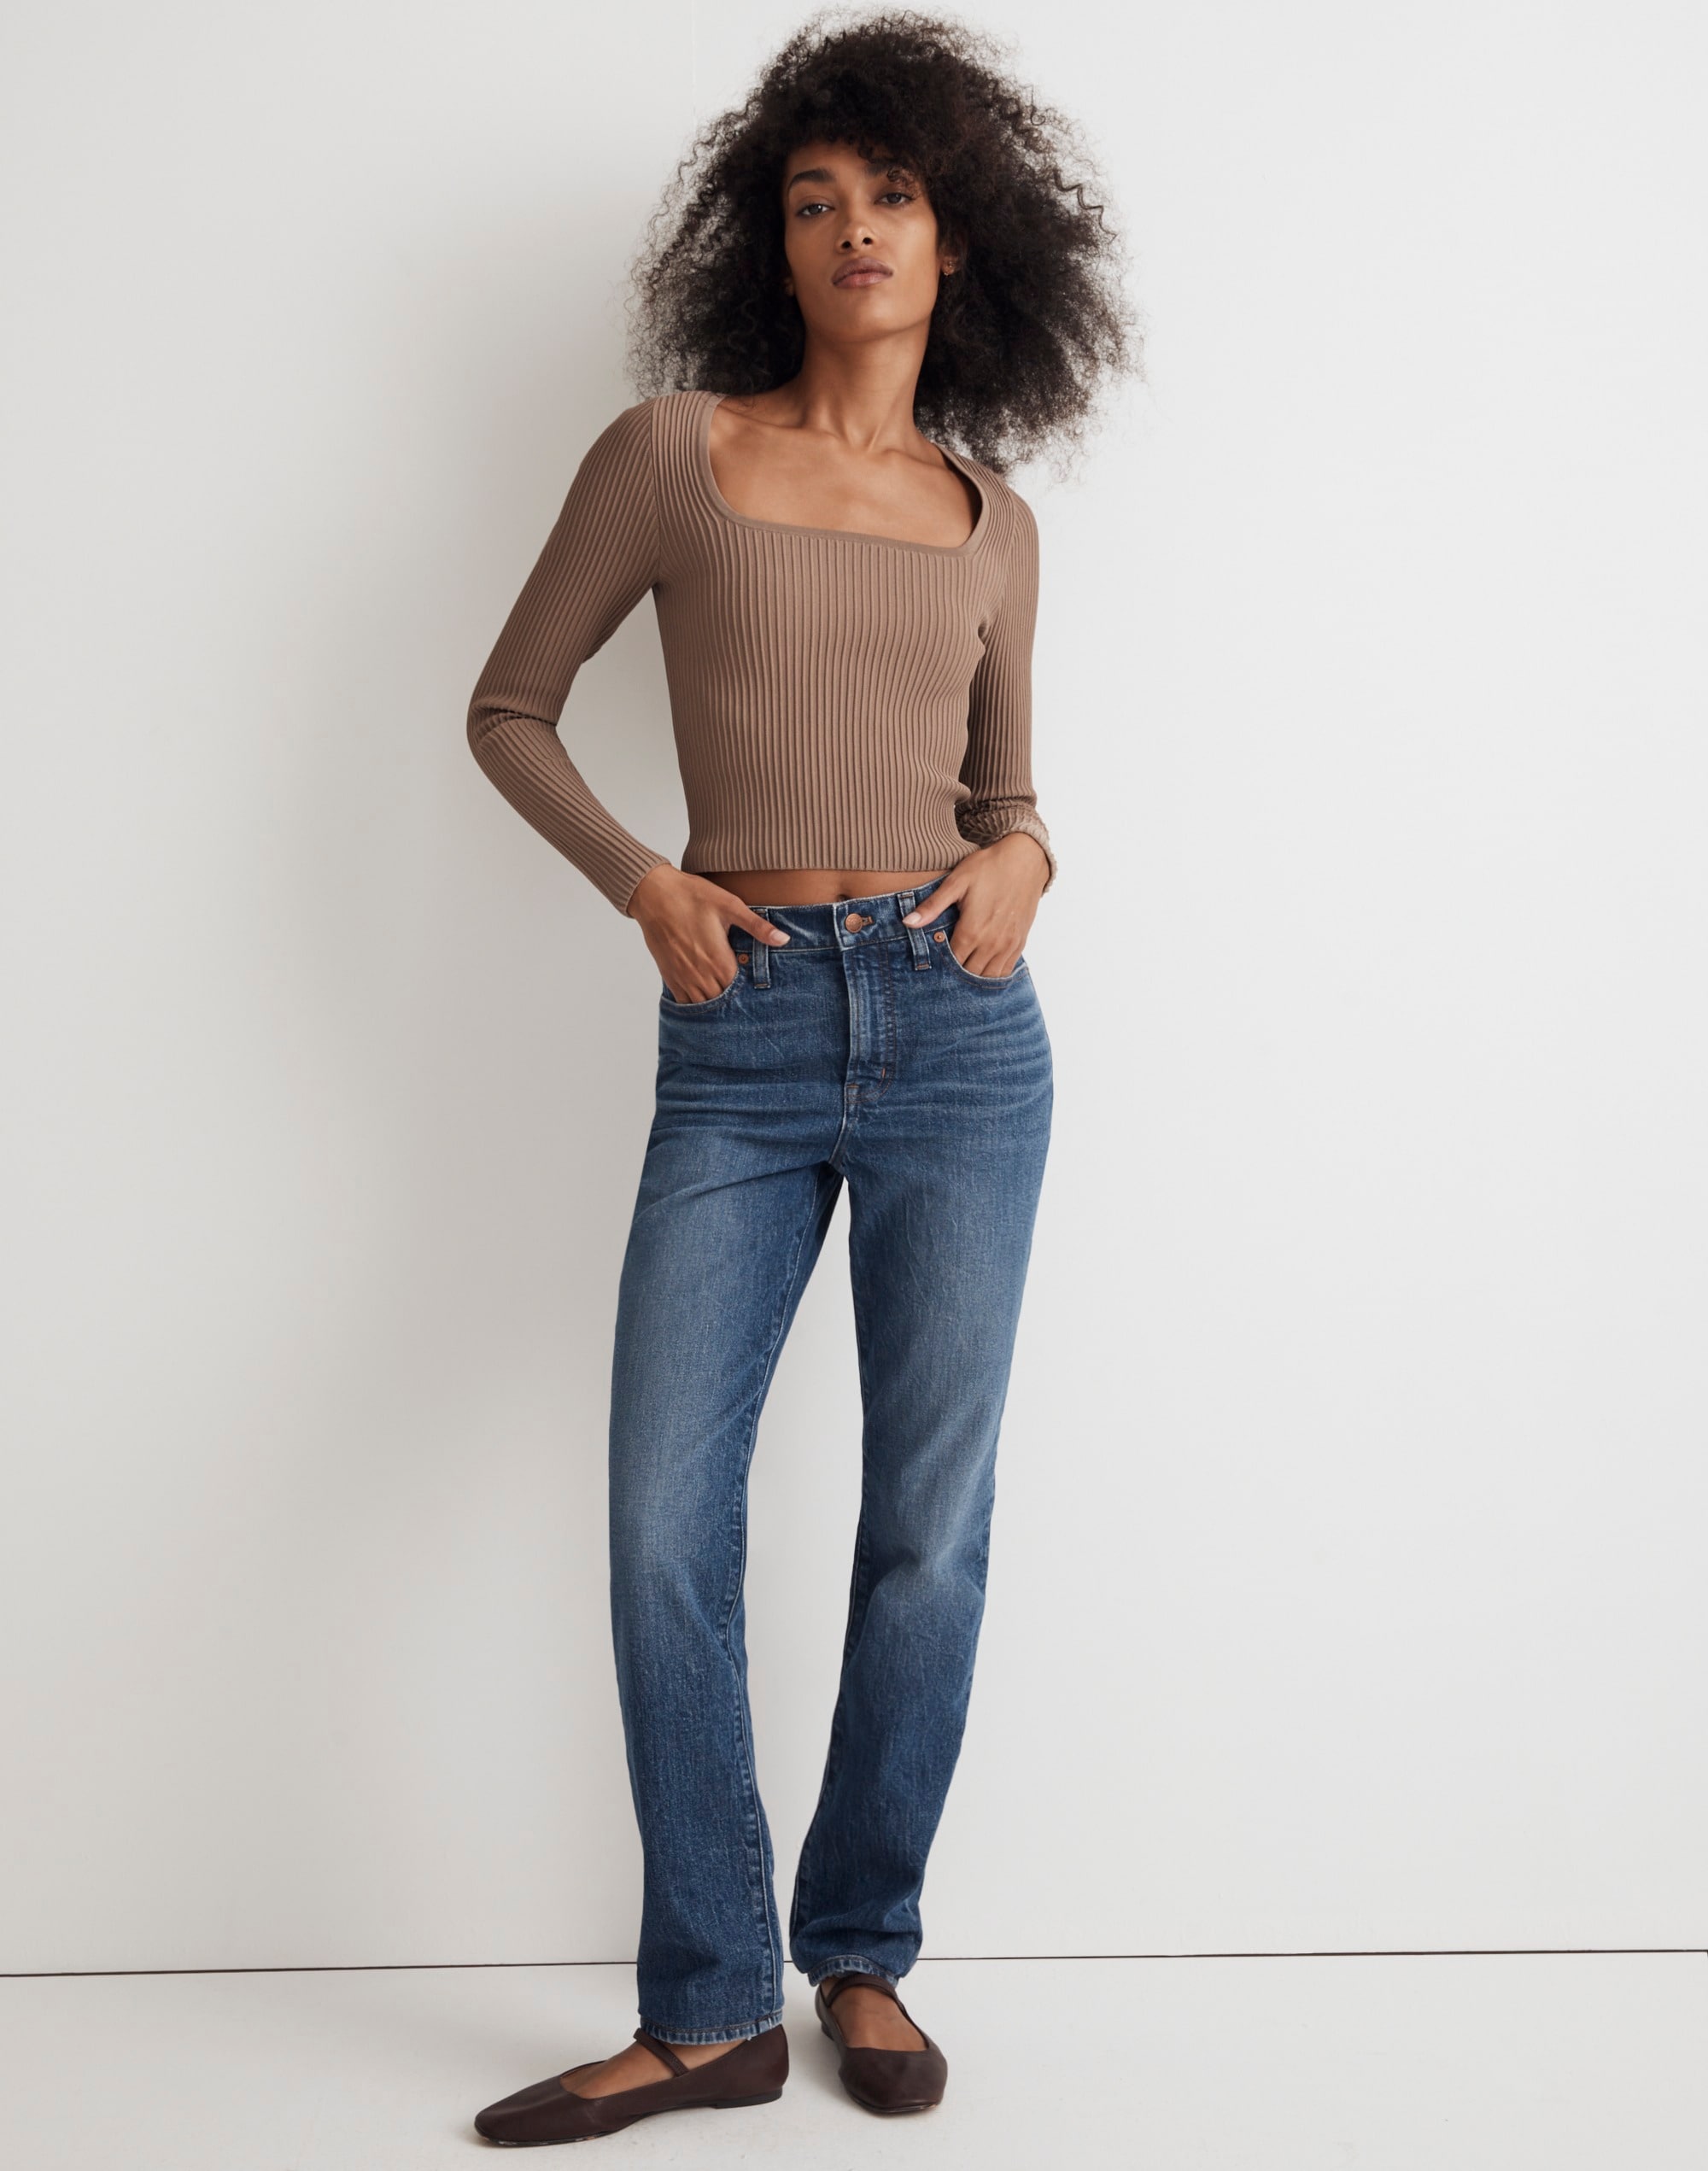 The Petite Perfect Vintage Jean | Madewell